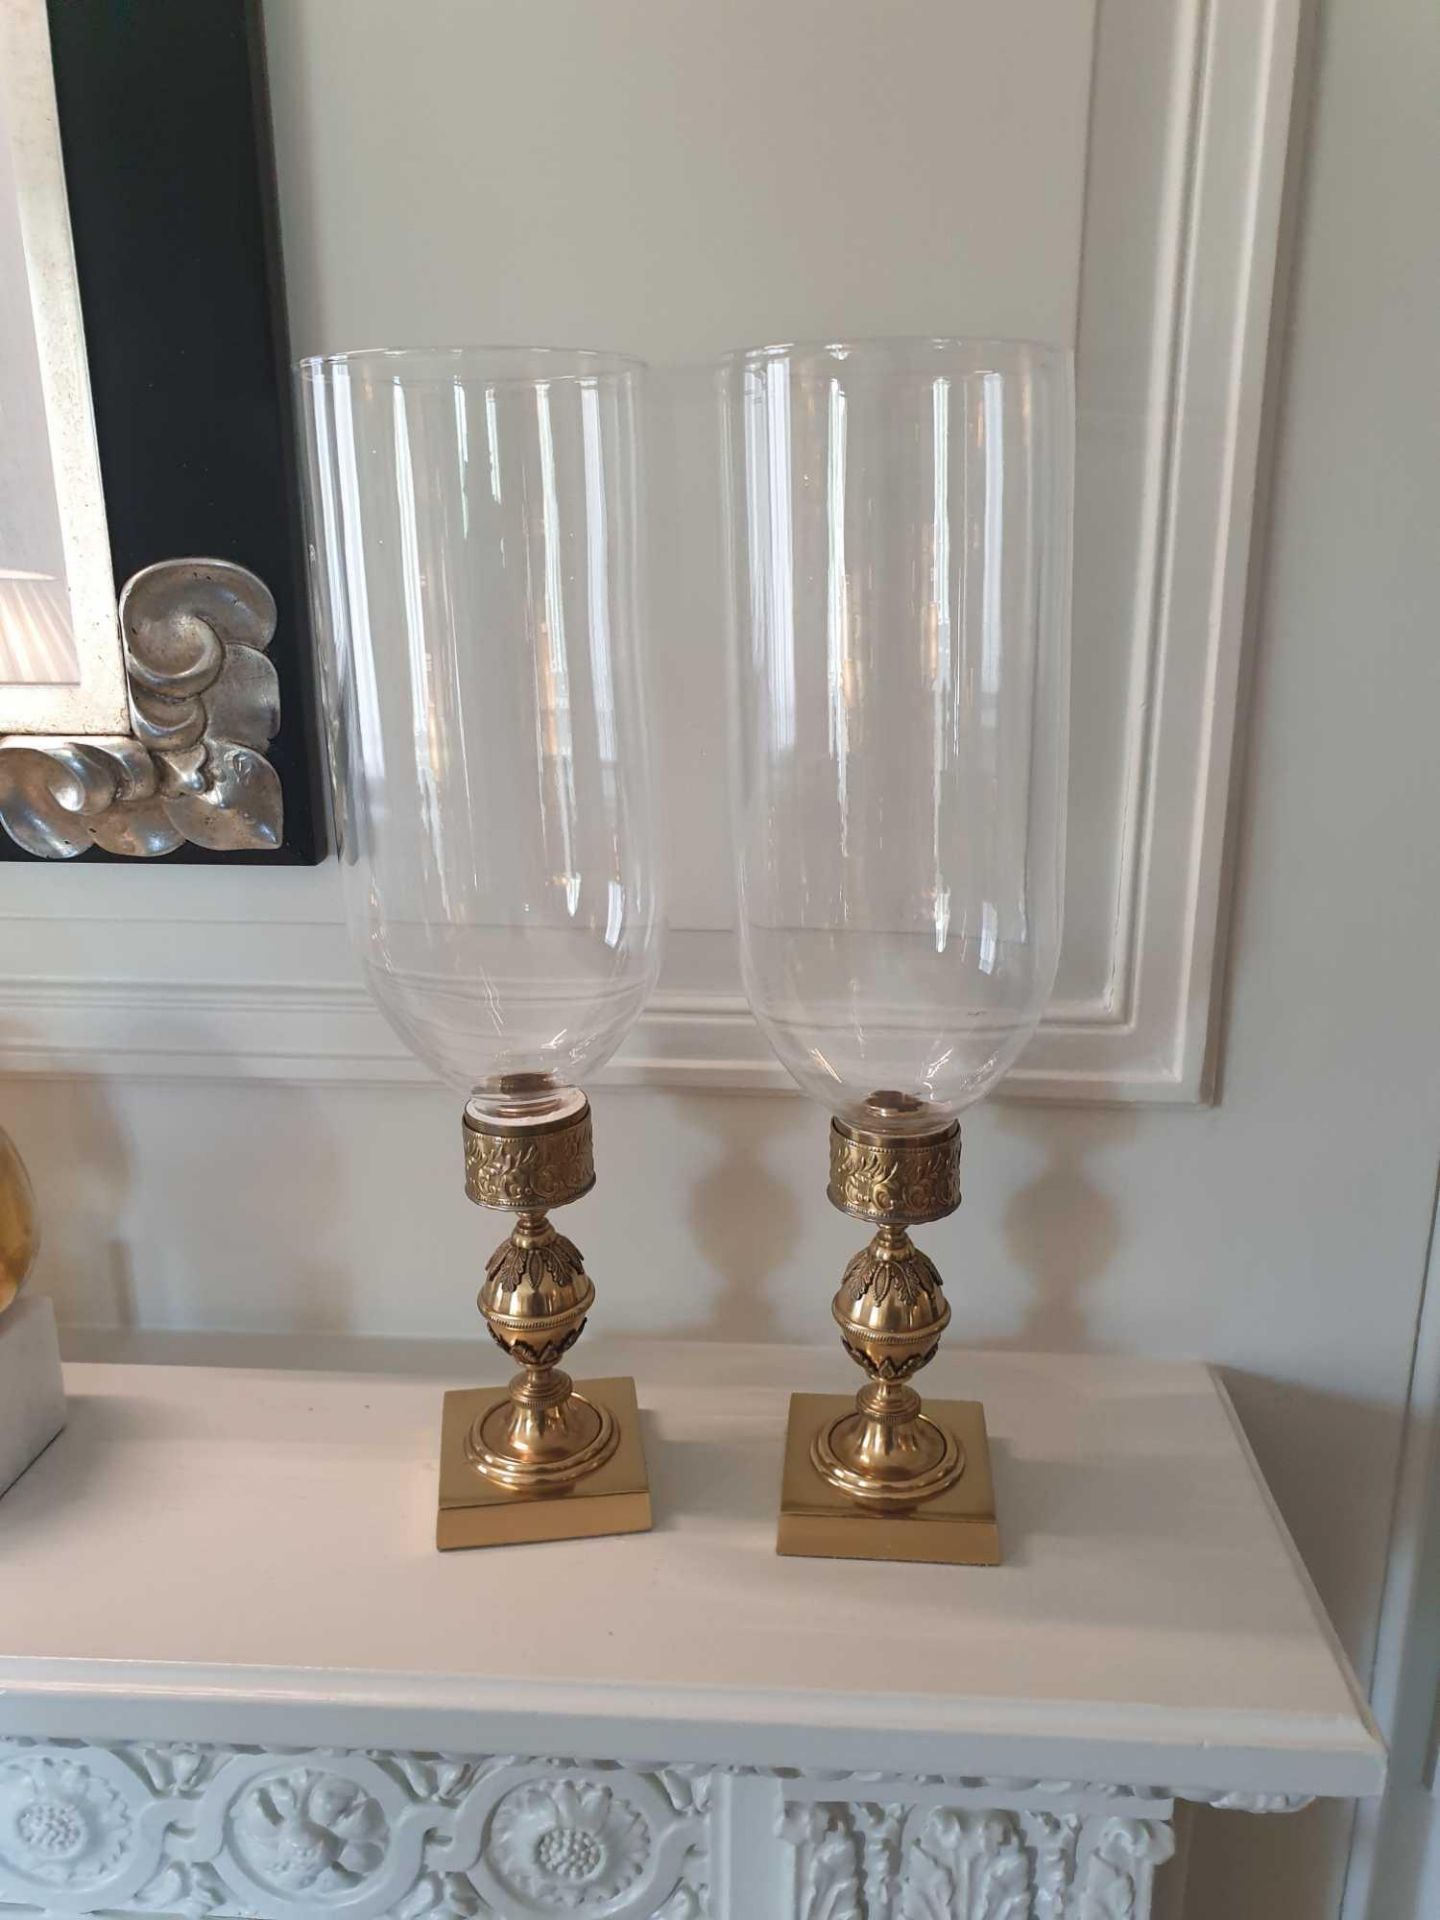 A Pair Of Candle Holders With Tall Glass Shades And Brass Featuring Ornamental Design 42cm (Room 306